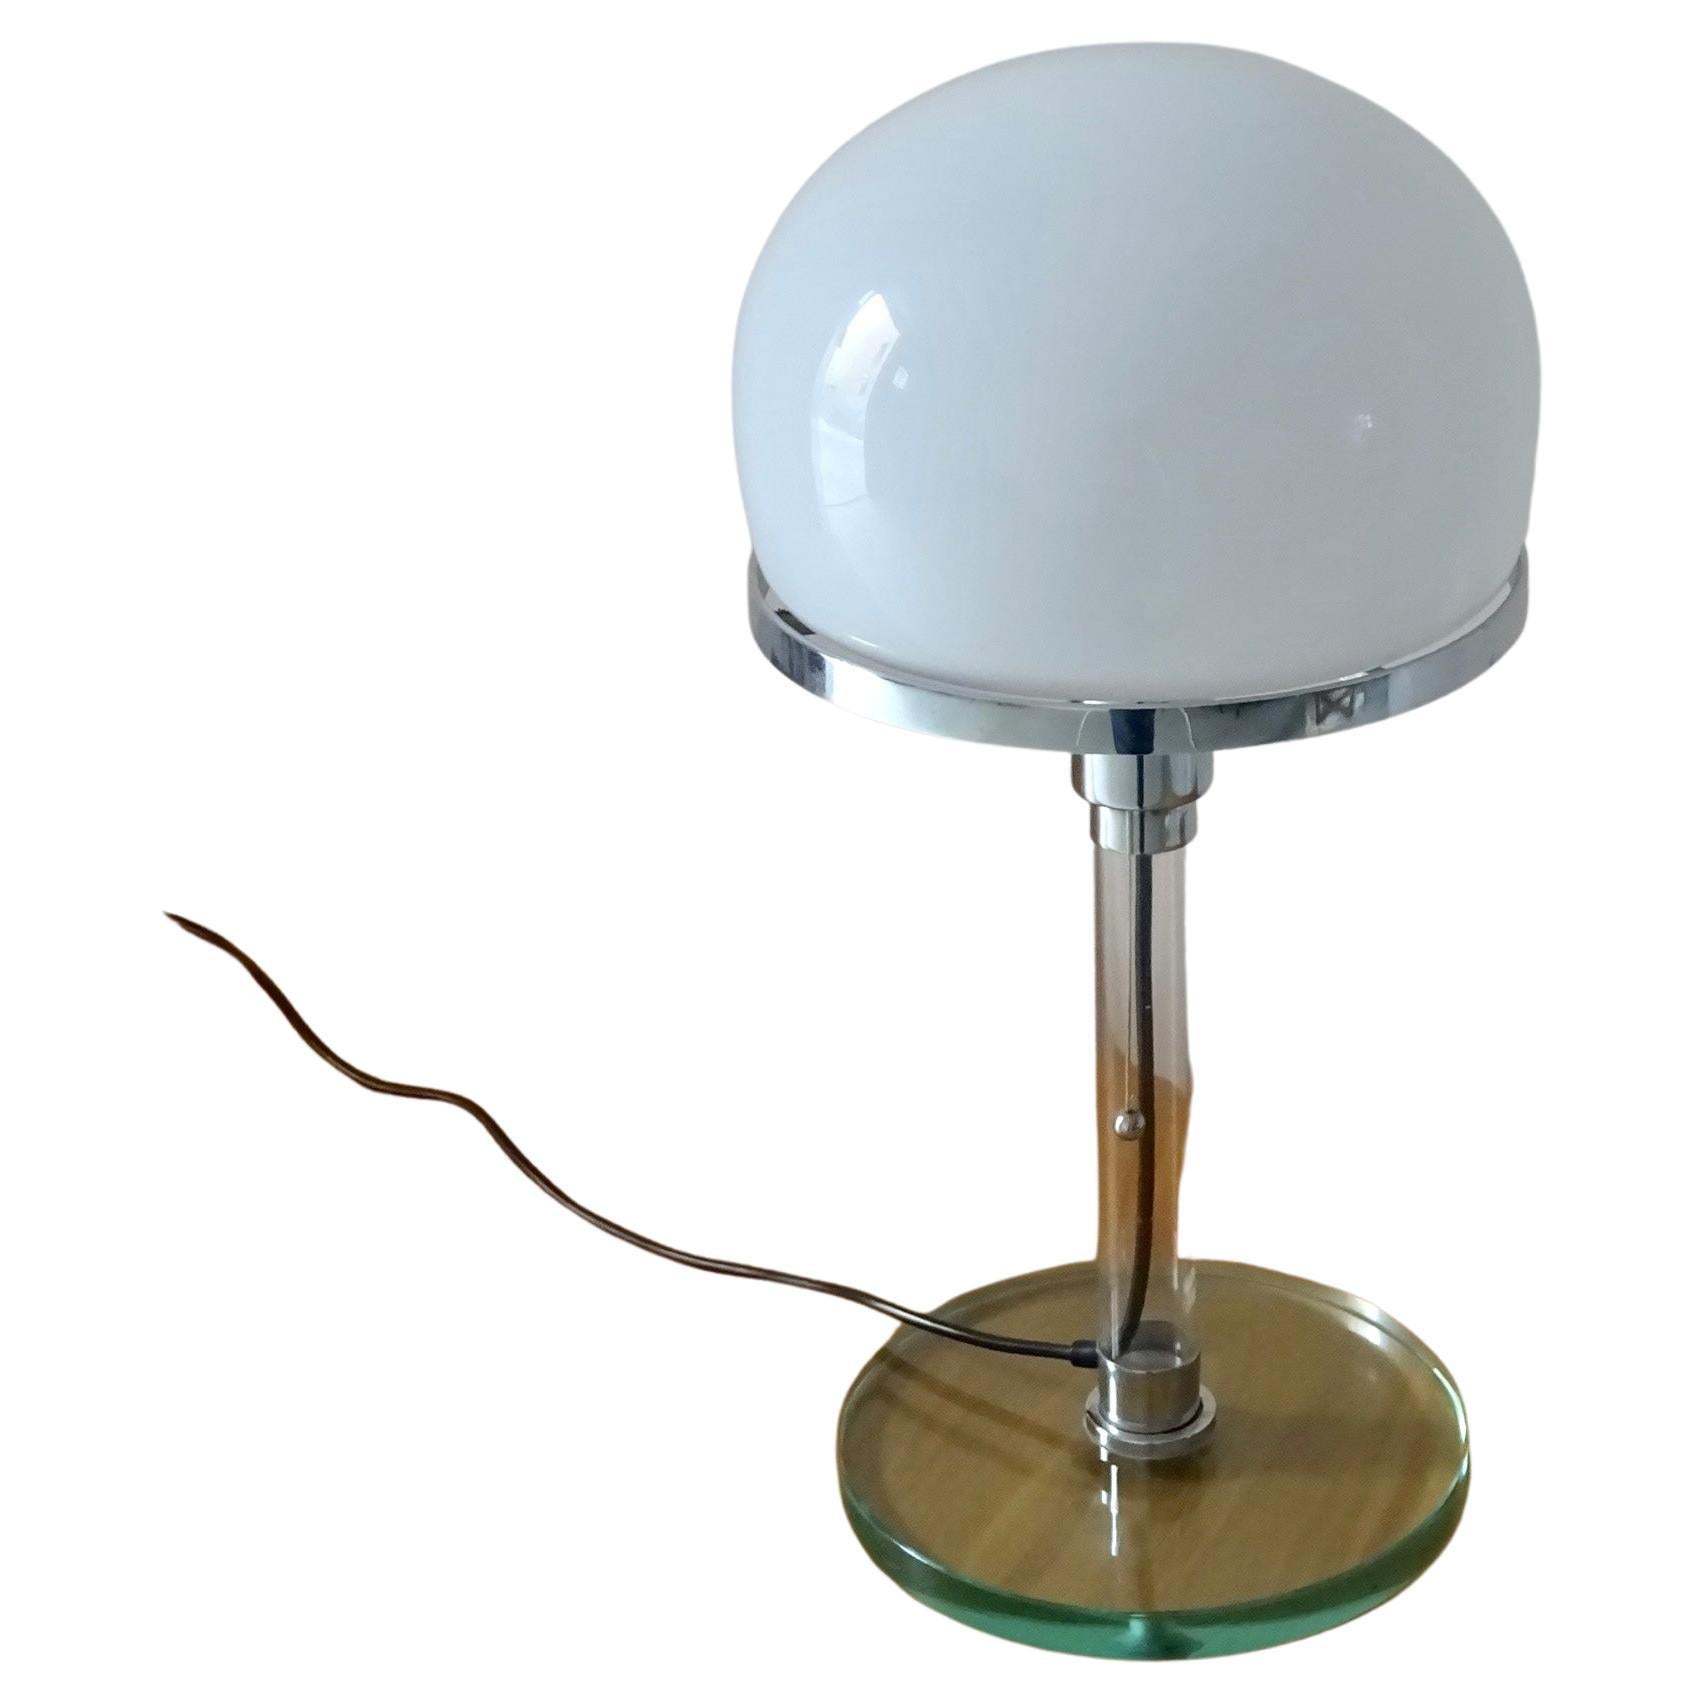 Valentino" Table Lamp by Metalarte, Bauhaus Inspired For Sale at 1stDibs